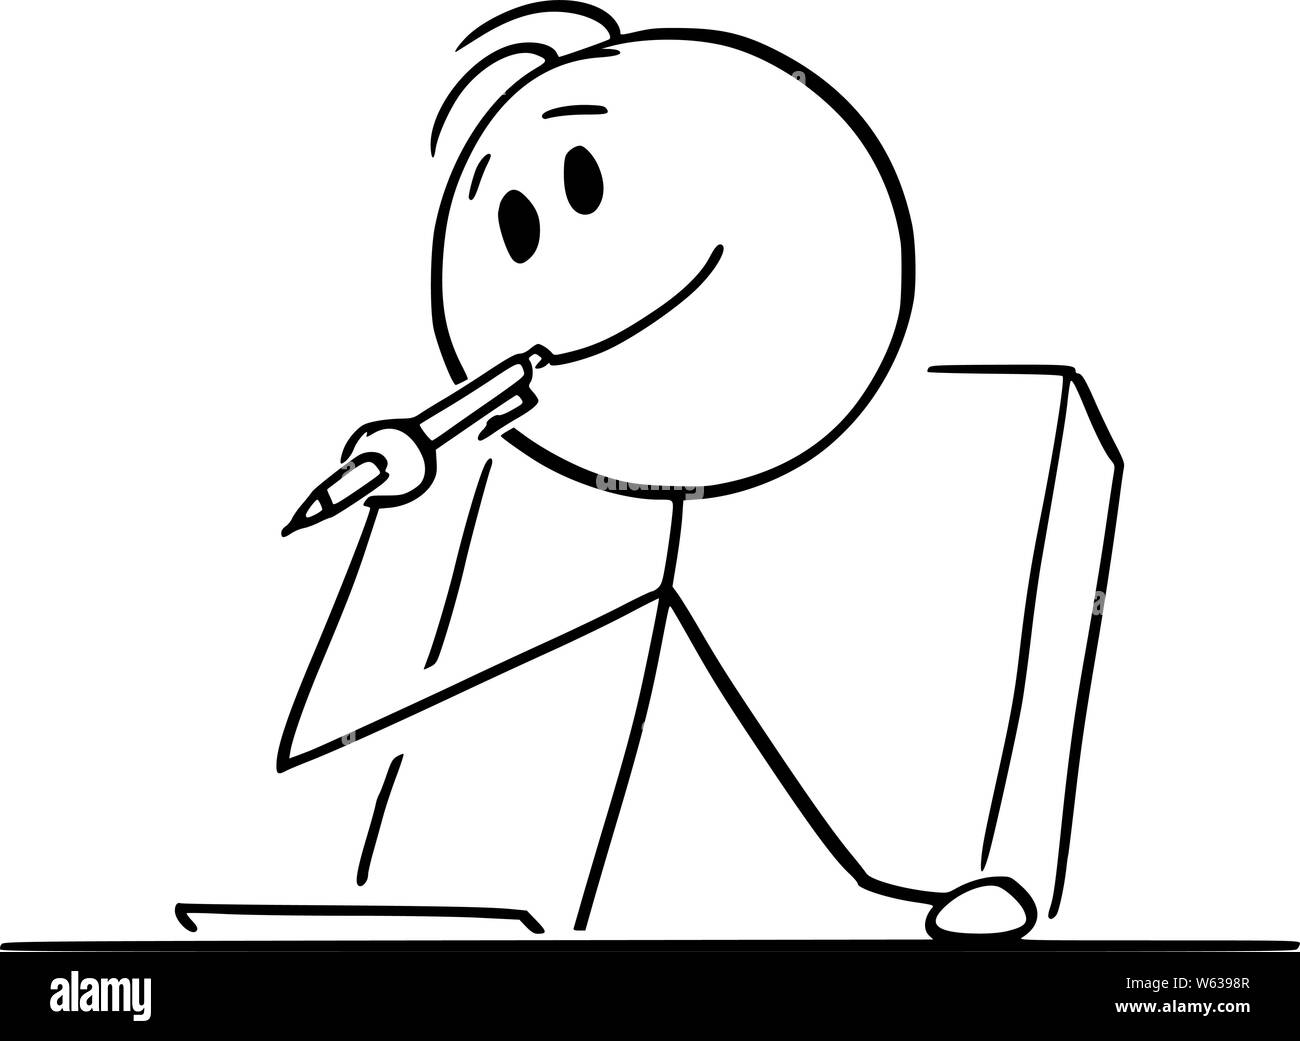 Vector cartoon stick figure drawing conceptual illustration of creative man or businessman or writer thinking about something, with ballpoint pen in mouth and piece of paper on the table. Stock Vector